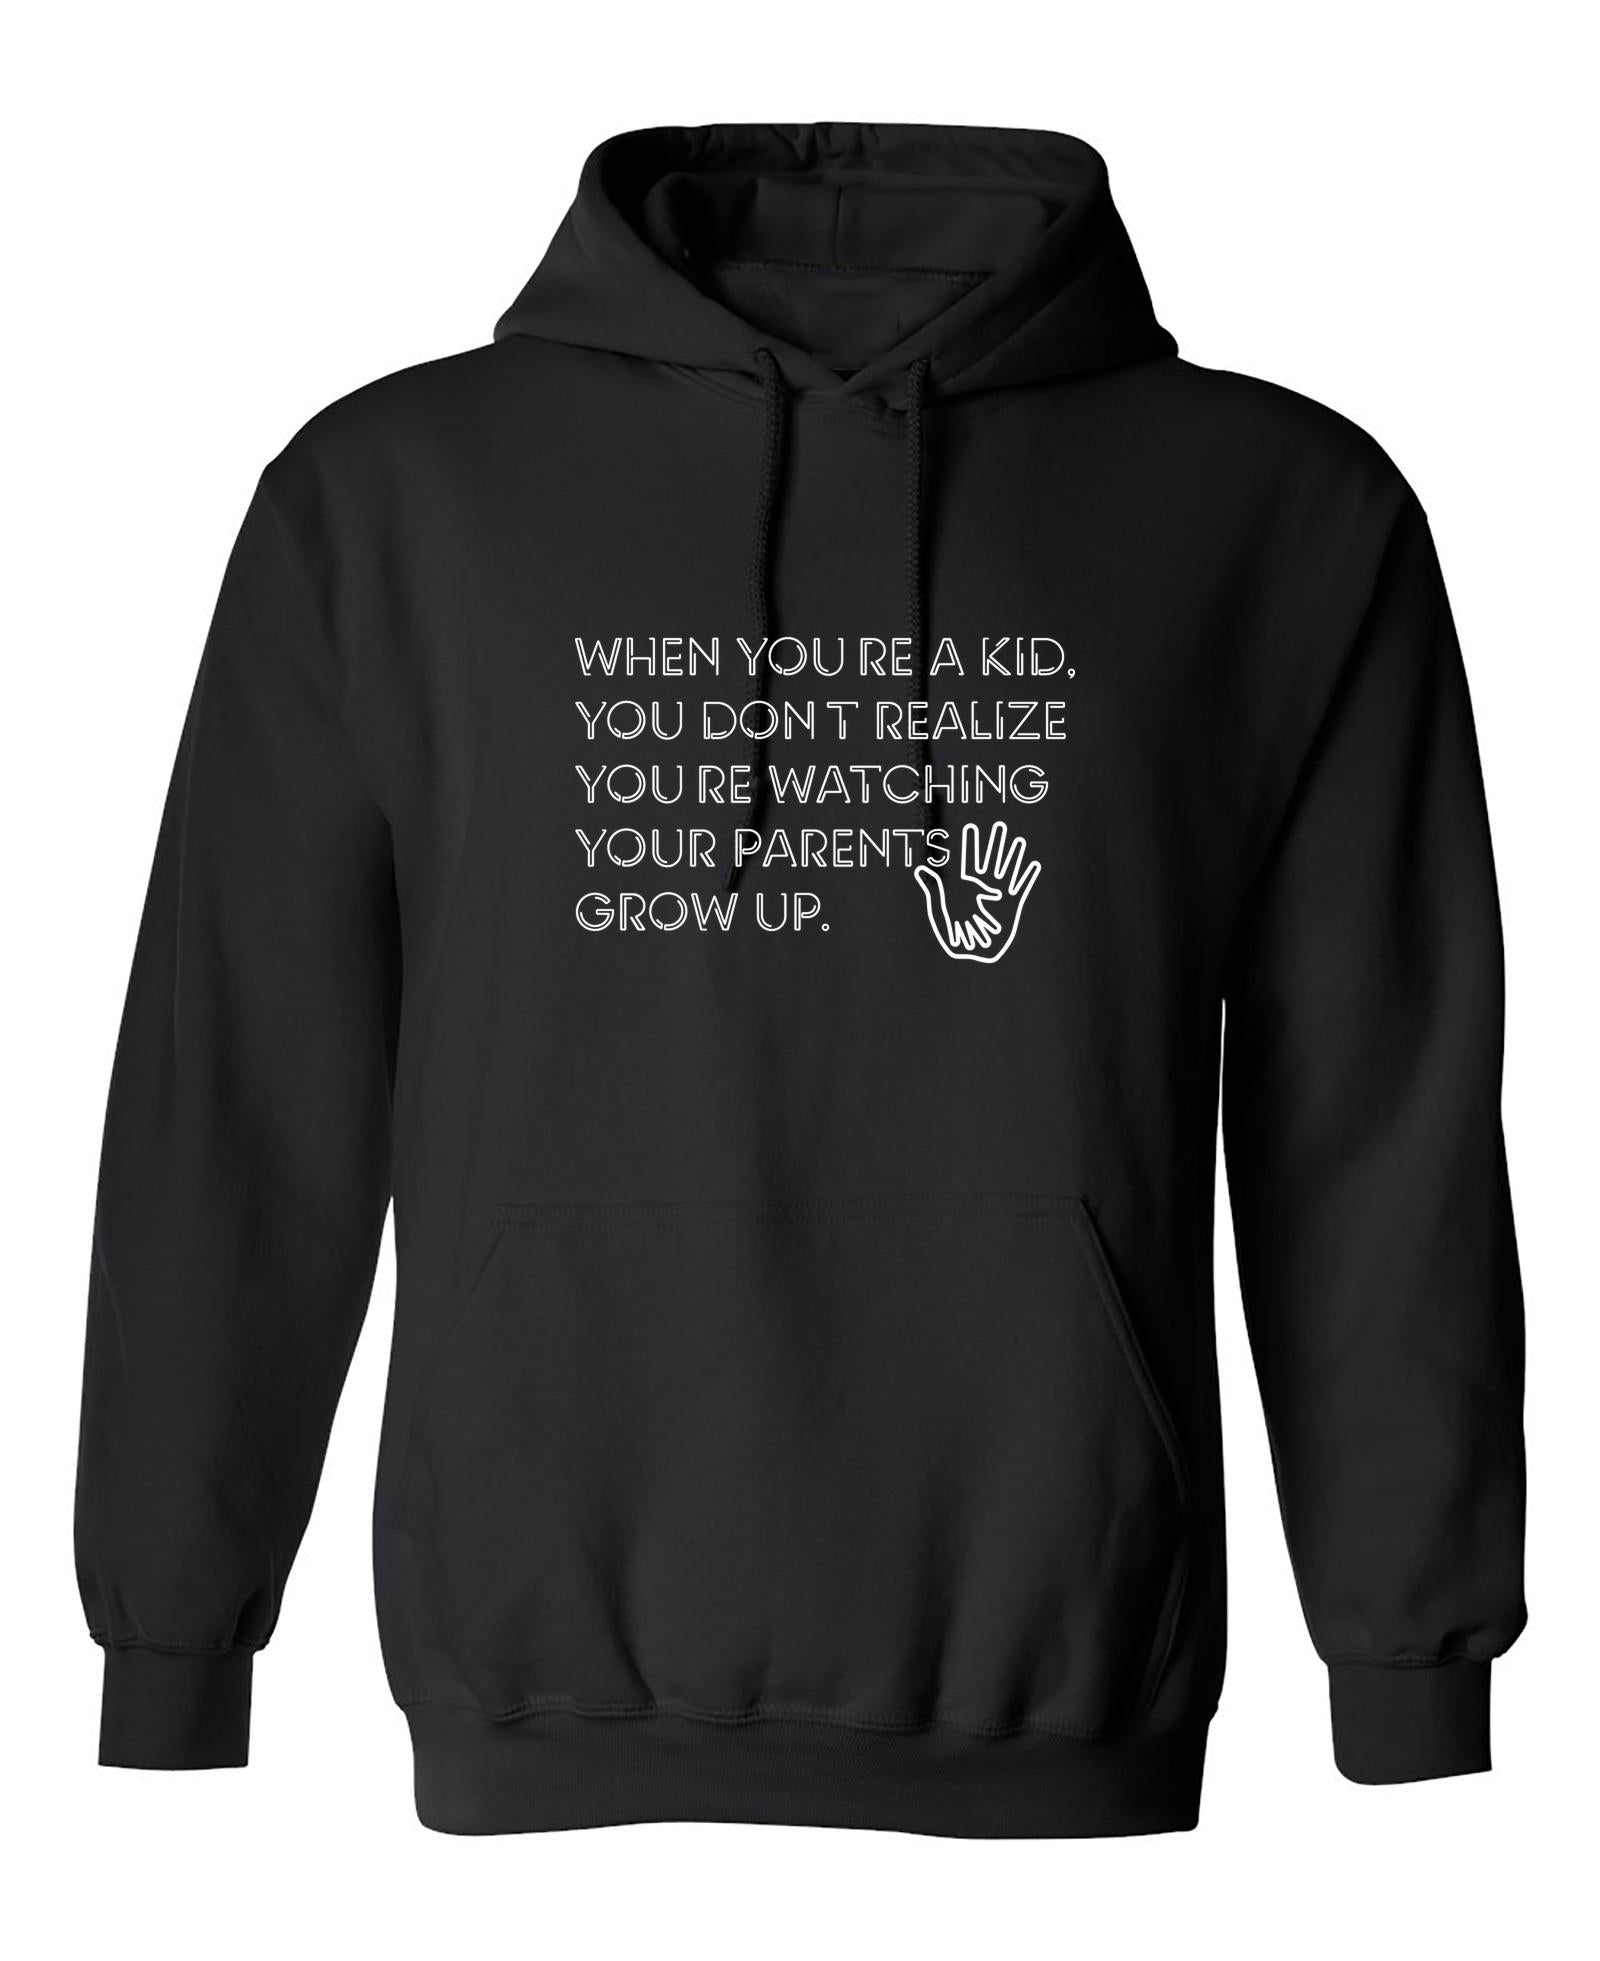 Funny T-Shirts design "You Don't Realize Your Parents Grow Up"